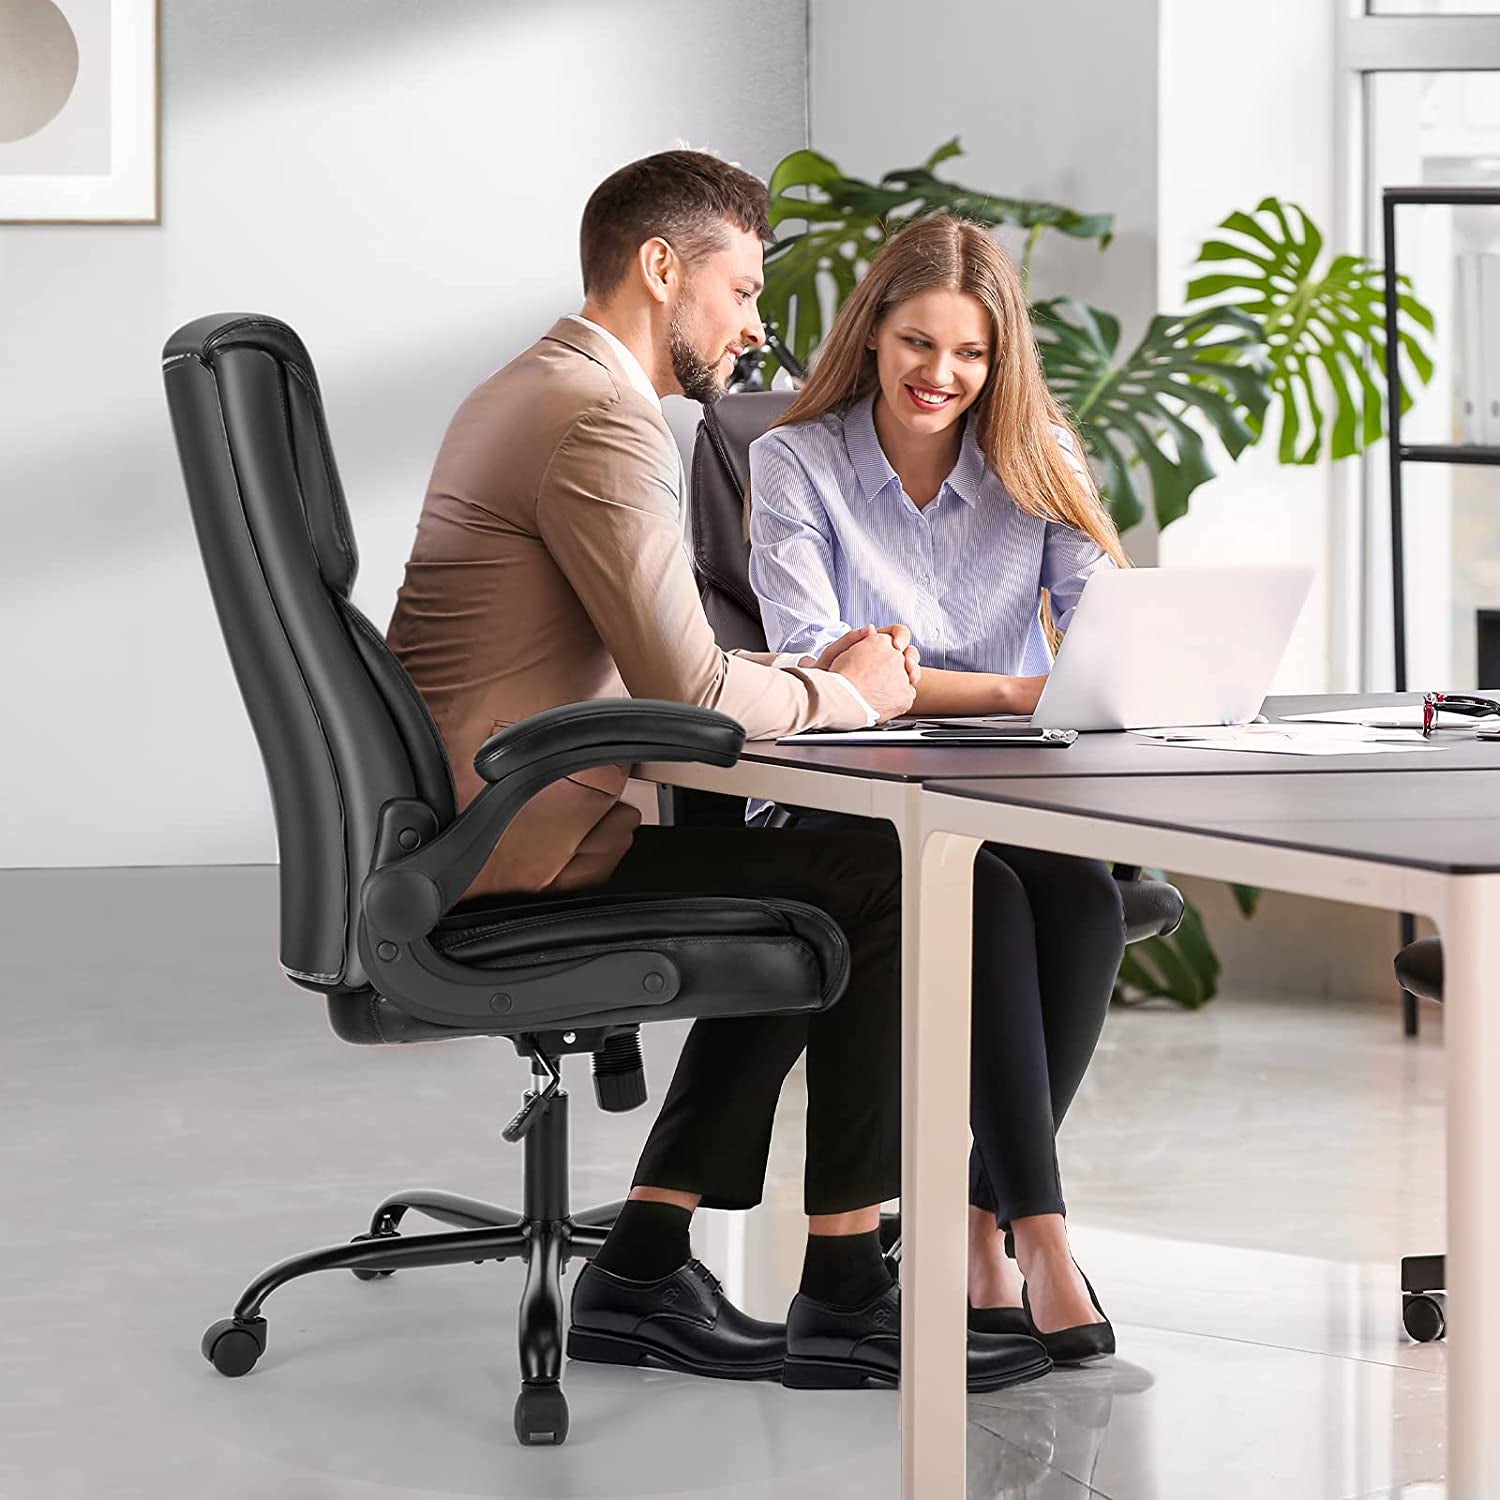 Professional Office Chair - Ergonomic Adjustable Computer Desk Chair with High Back Flip-Up Armrests, Swivel Task Chair with Lumbar Support and Bonded Leather